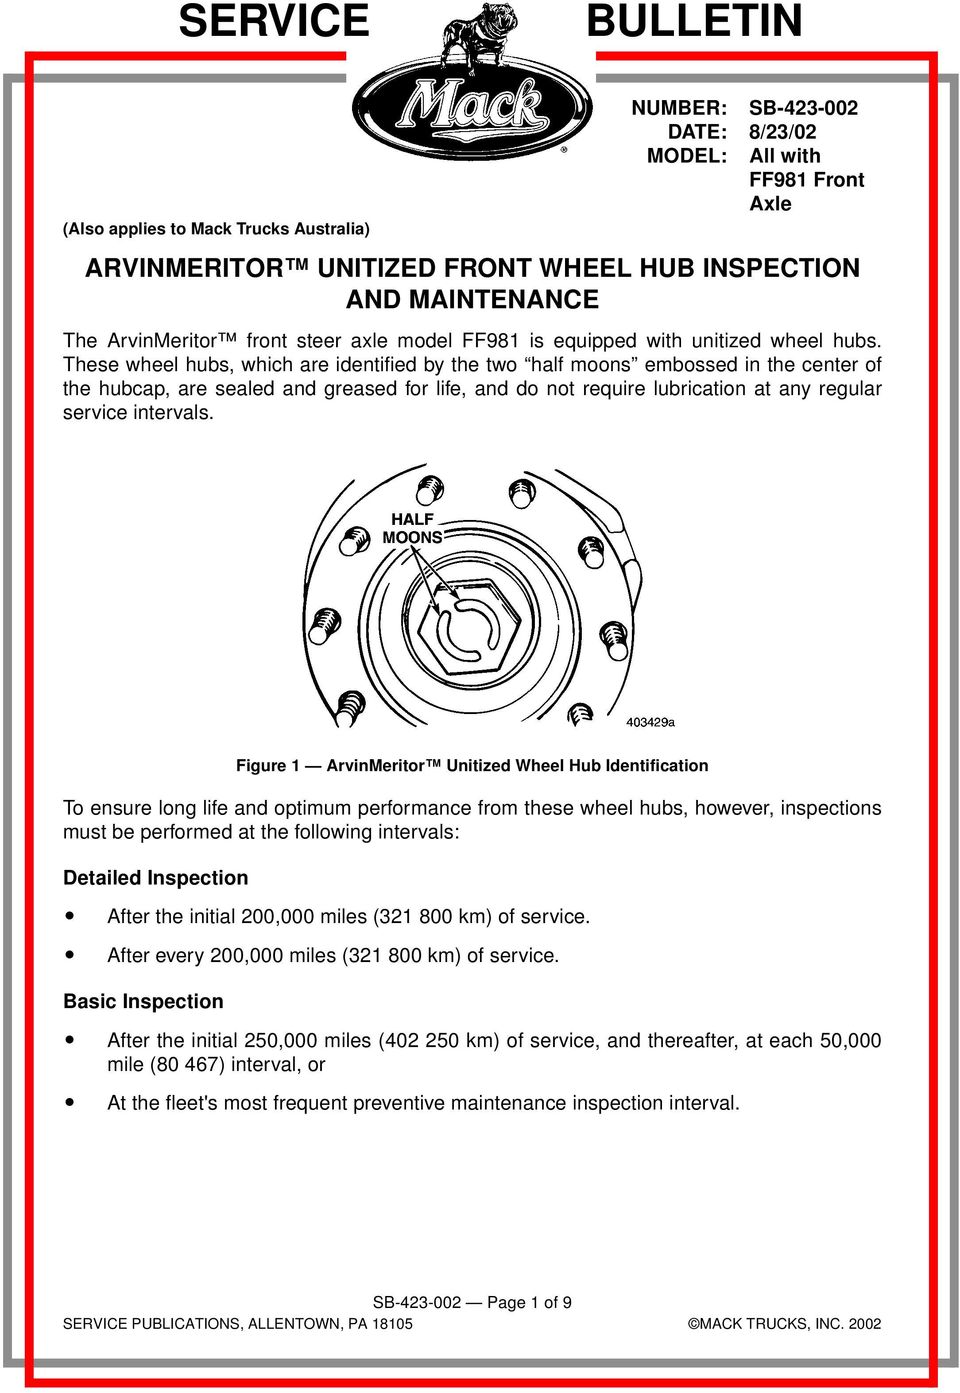 These wheel hubs, which are identified by the two half moons embossed in the center of the hubcap, are sealed and greased for life, and do not require lubrication at any regular service intervals.